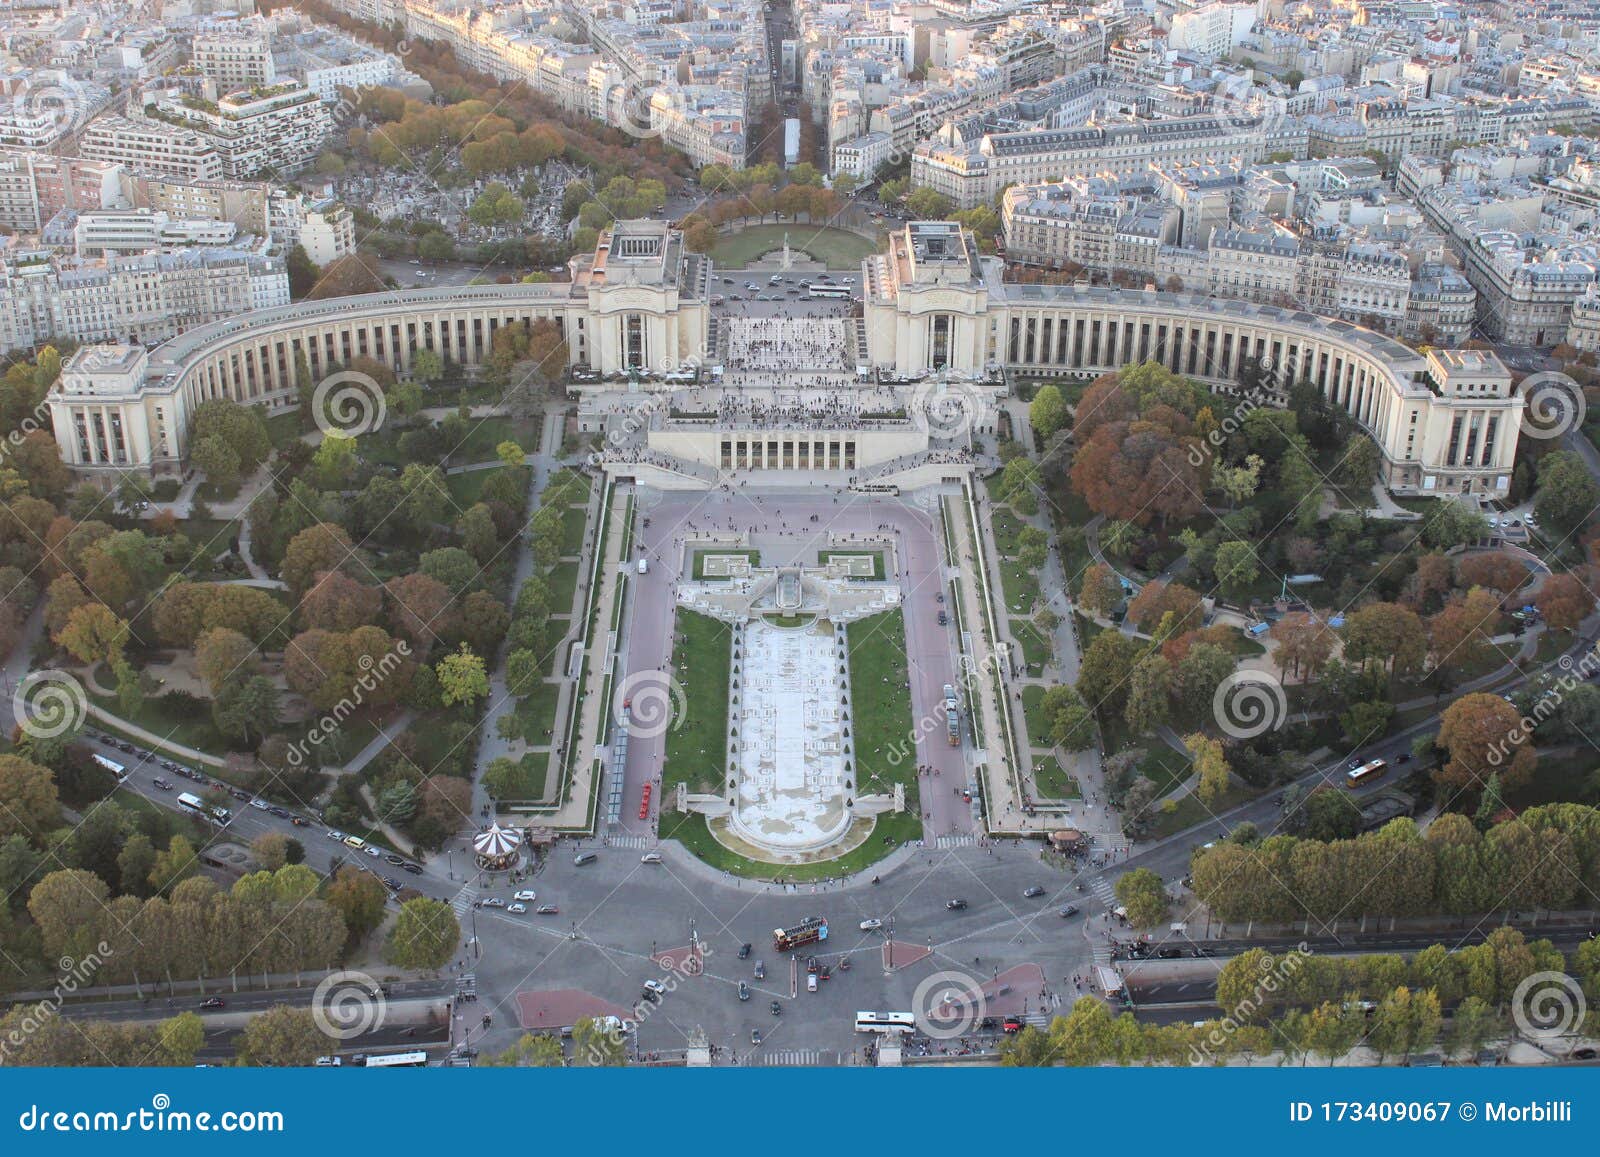 view from the eiffel tower to the place du trocadÃÂ©ro, paris, france